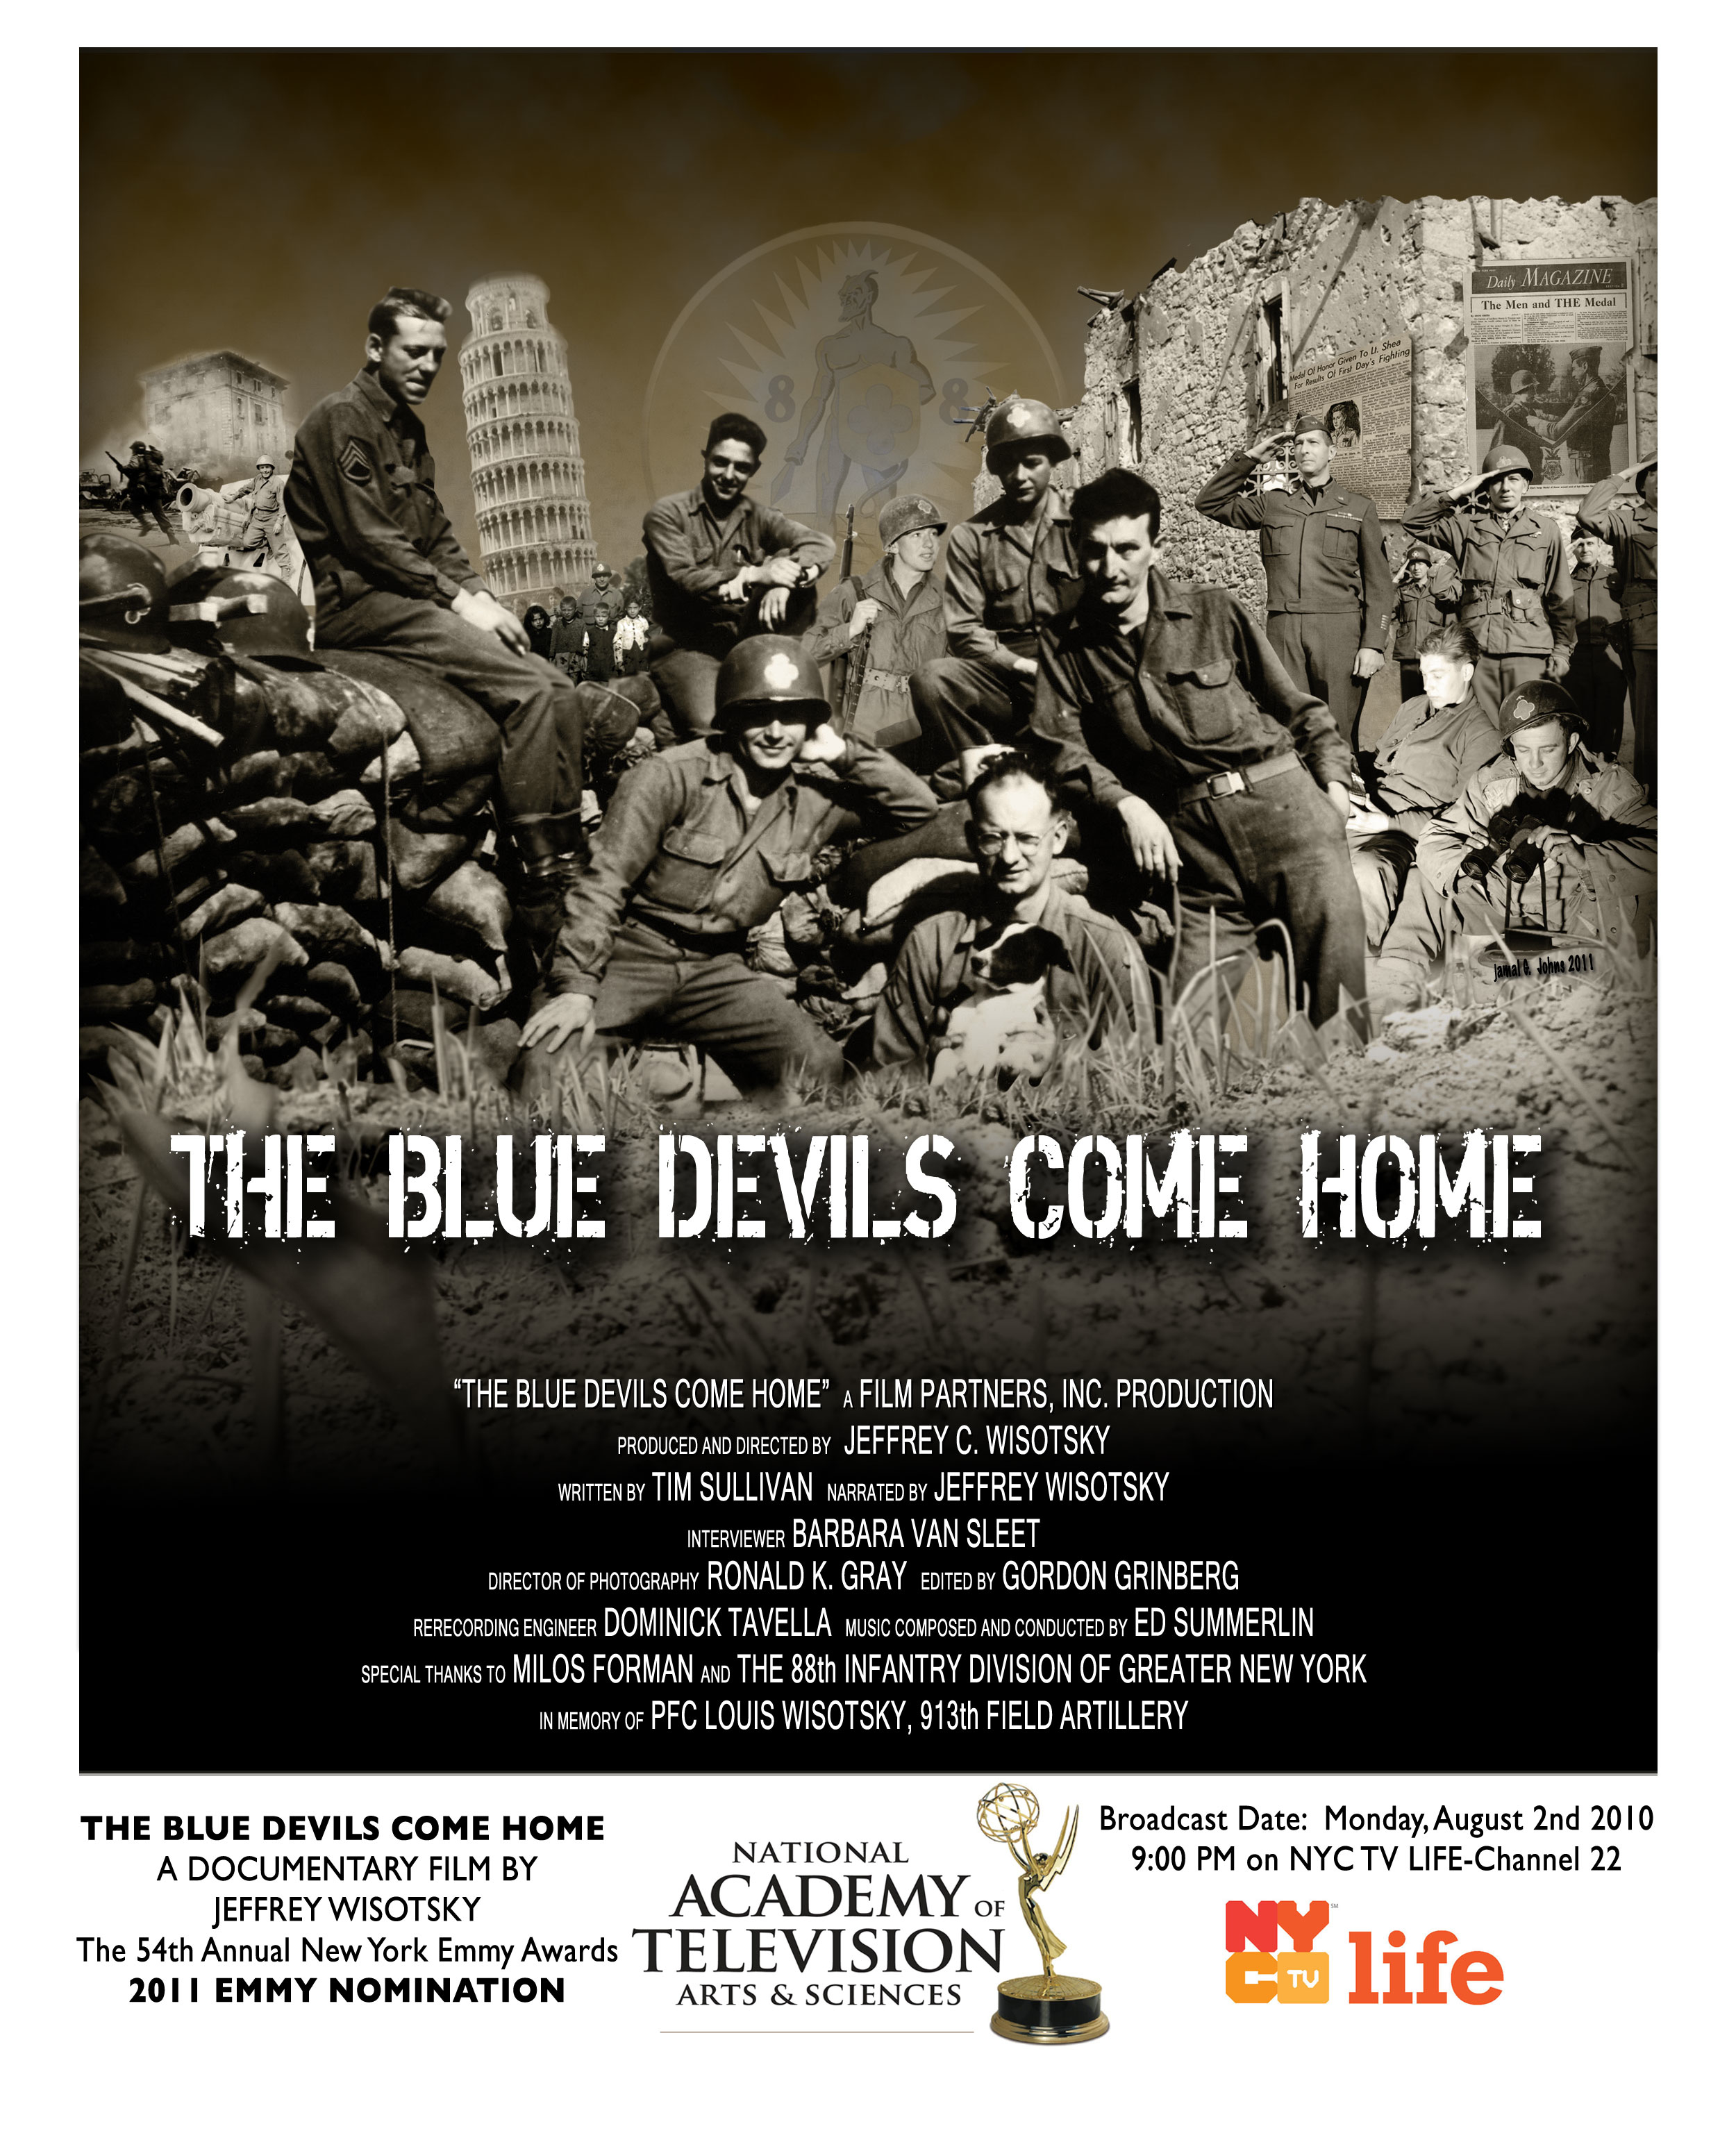 The Movie Poster for Jeffrey Wisotsky's EMMY Nominated documentary film, THE BLUE DEVILS COME HOME.